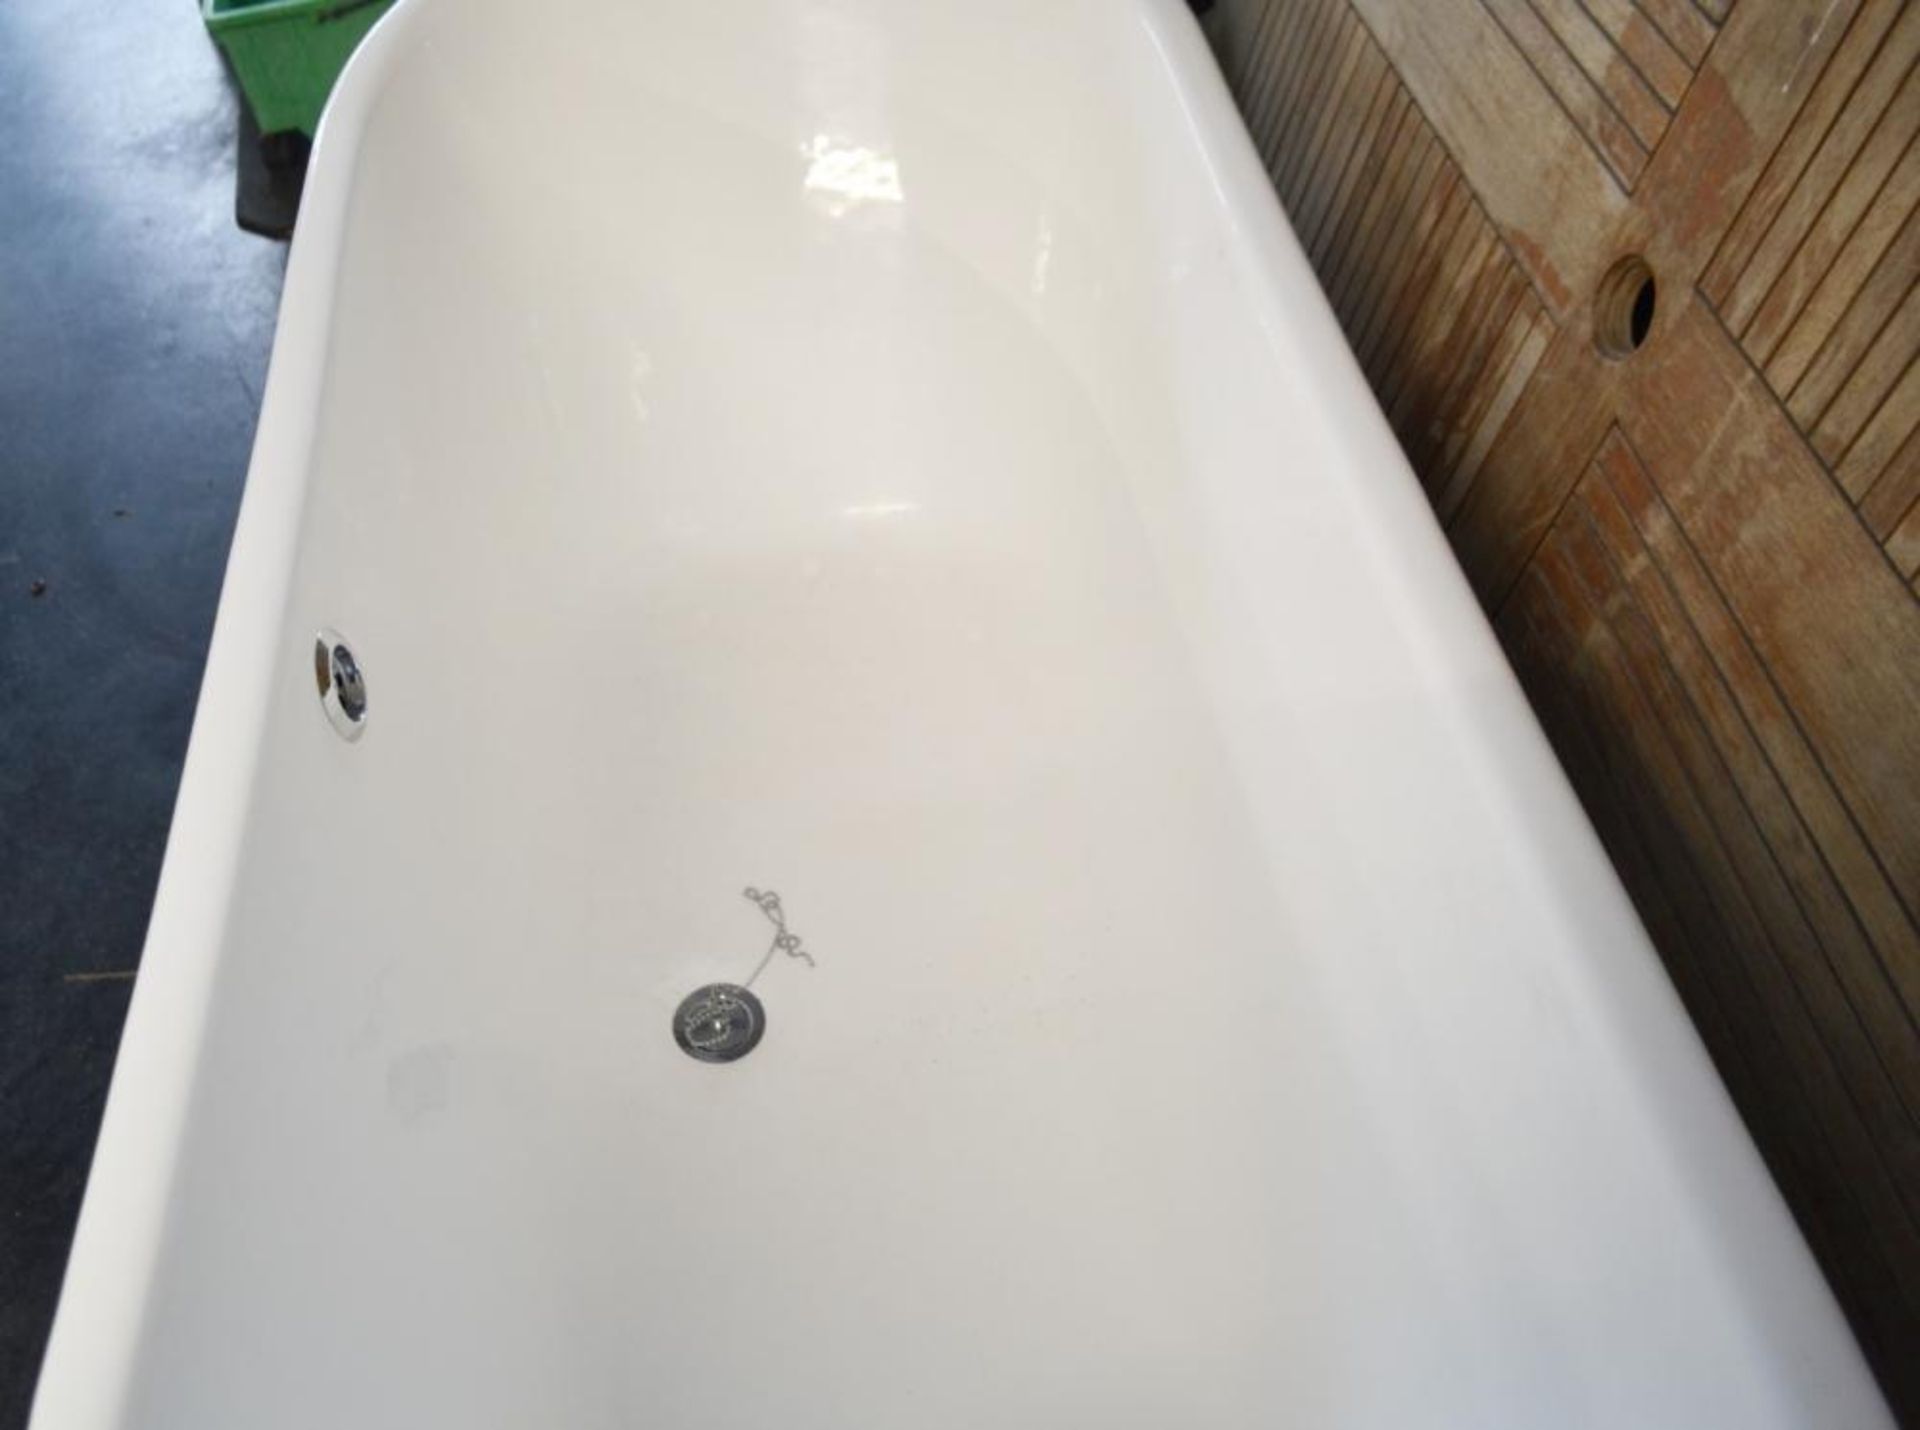 1 x Cast Iron Bath With Stainless Steel Exterior - CL439 - Location: Ilkey LS29 - Used In Good Condi - Image 5 of 8